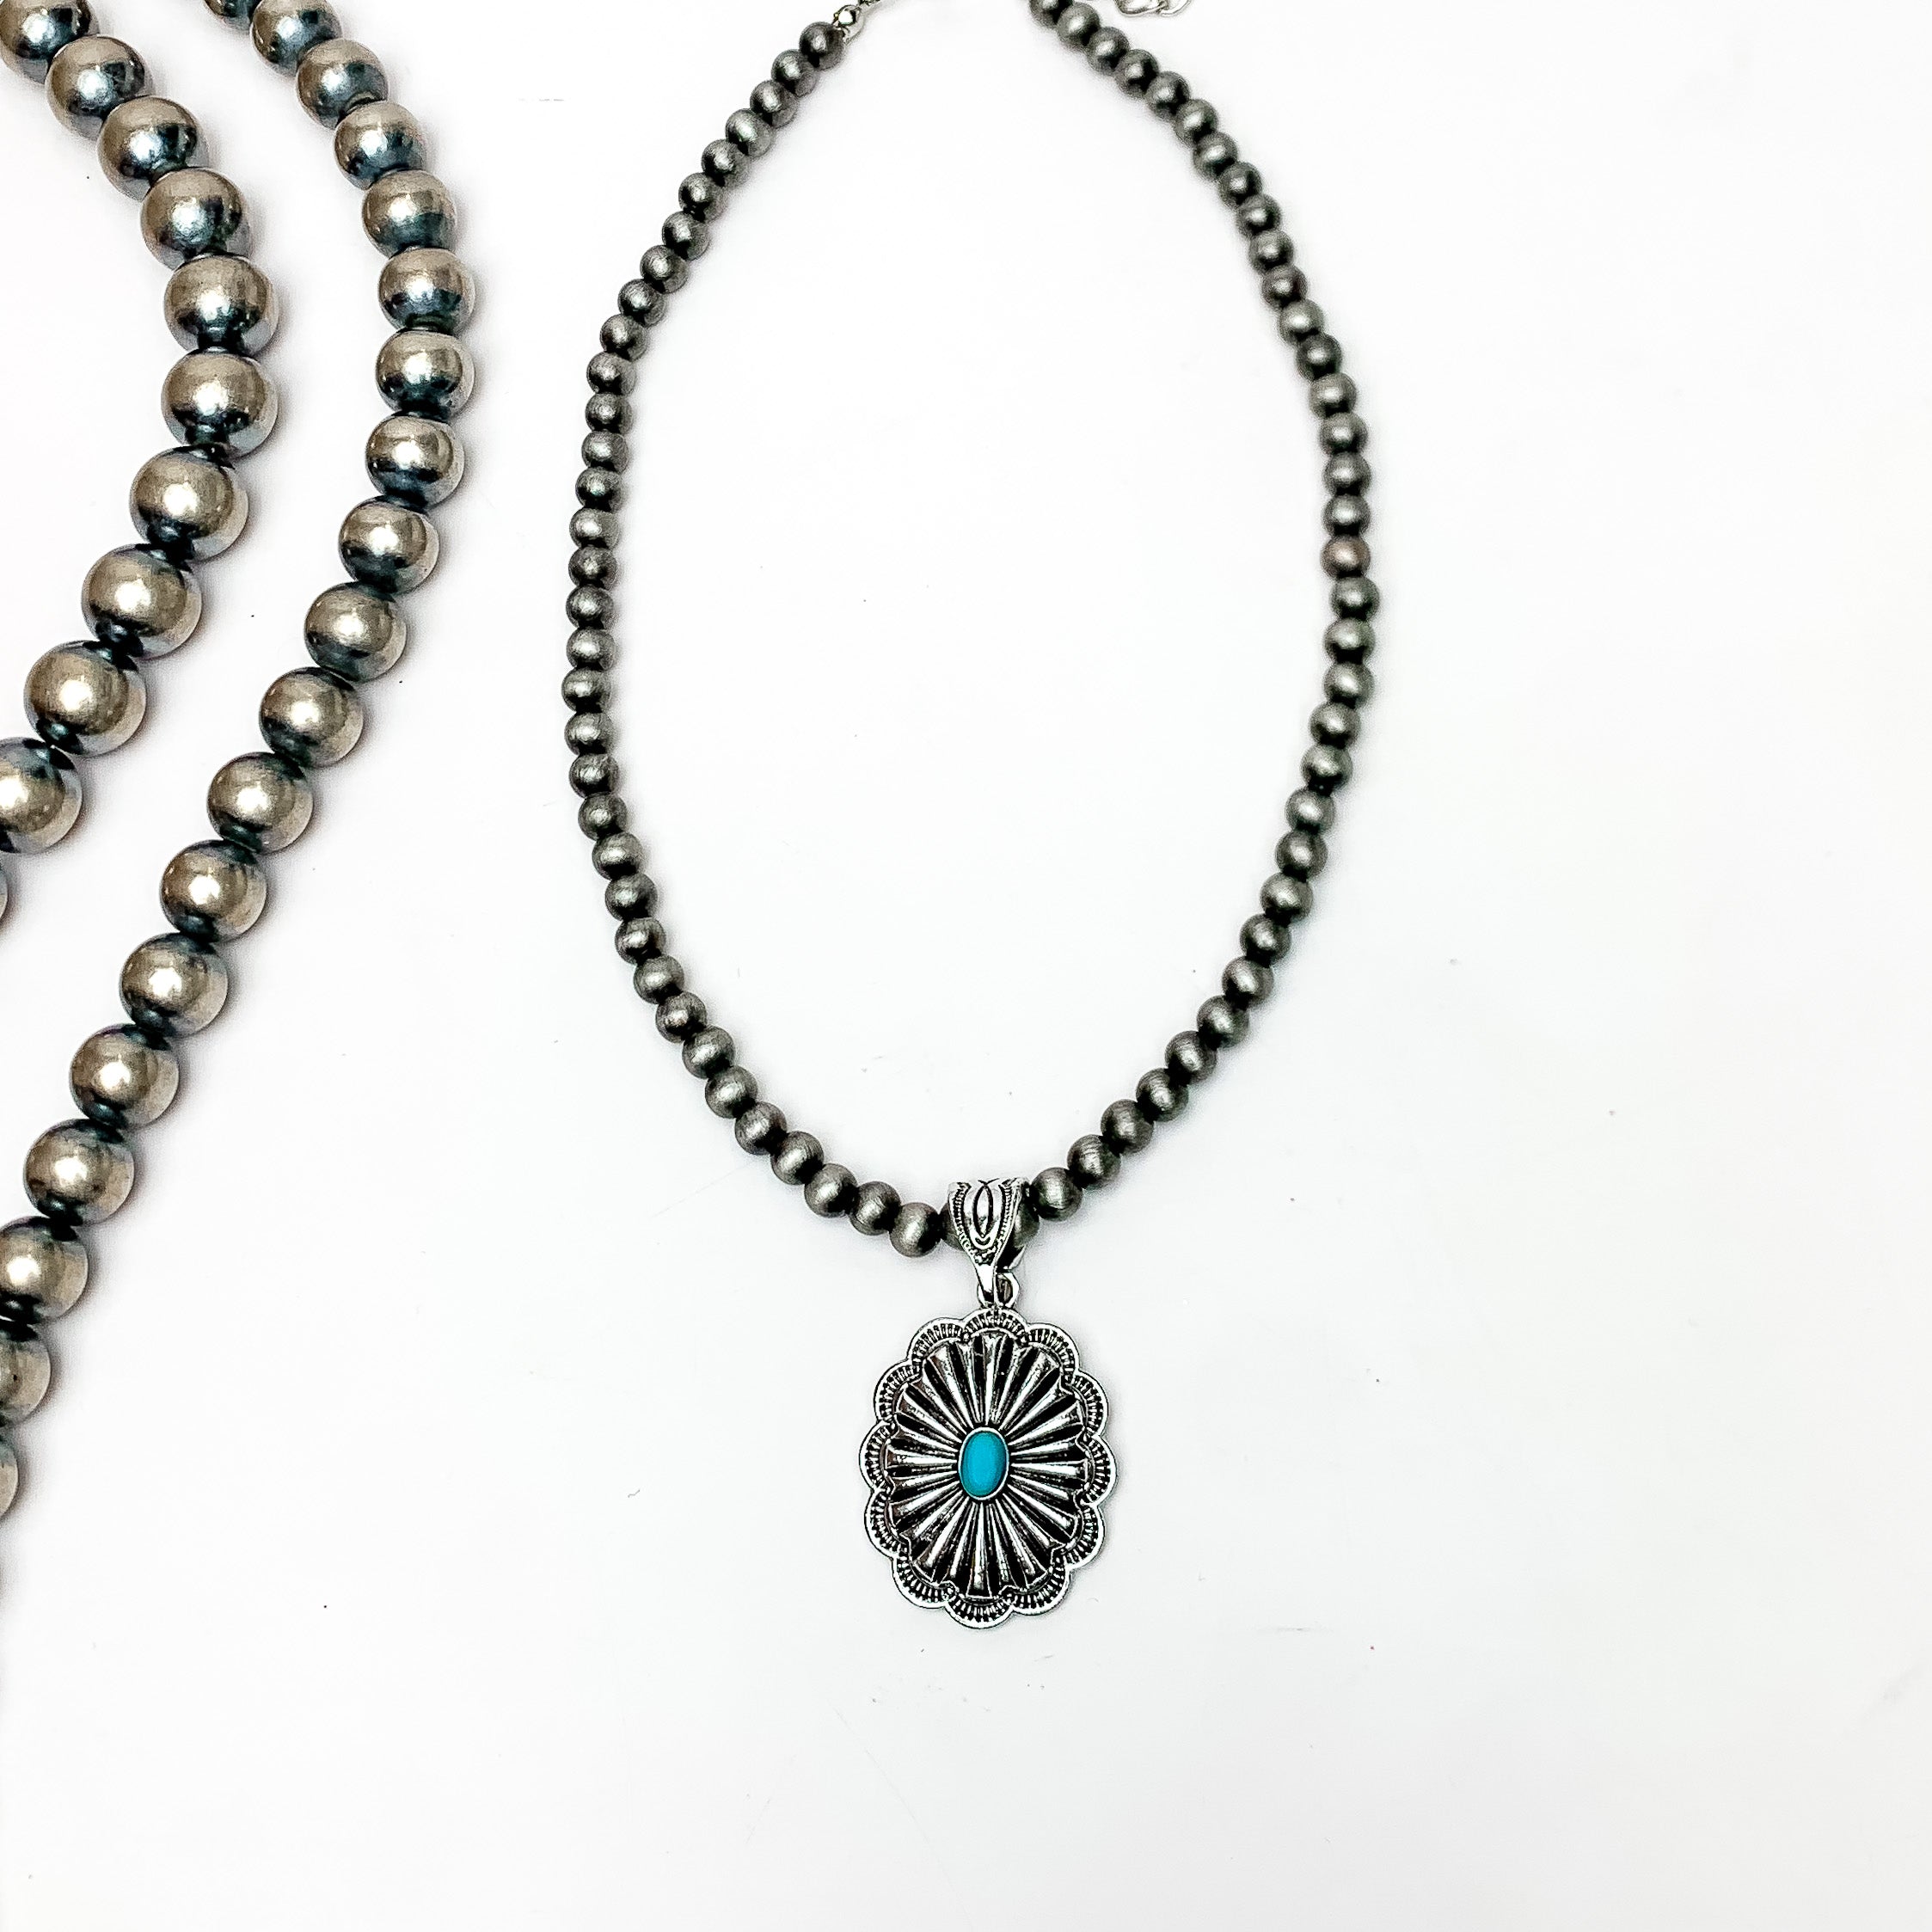 Silver Tone Pearl Necklace Featuring a Pendent With Turquoise Stone. Pictured on a white background with Navajo peals on the left side of the necklace.